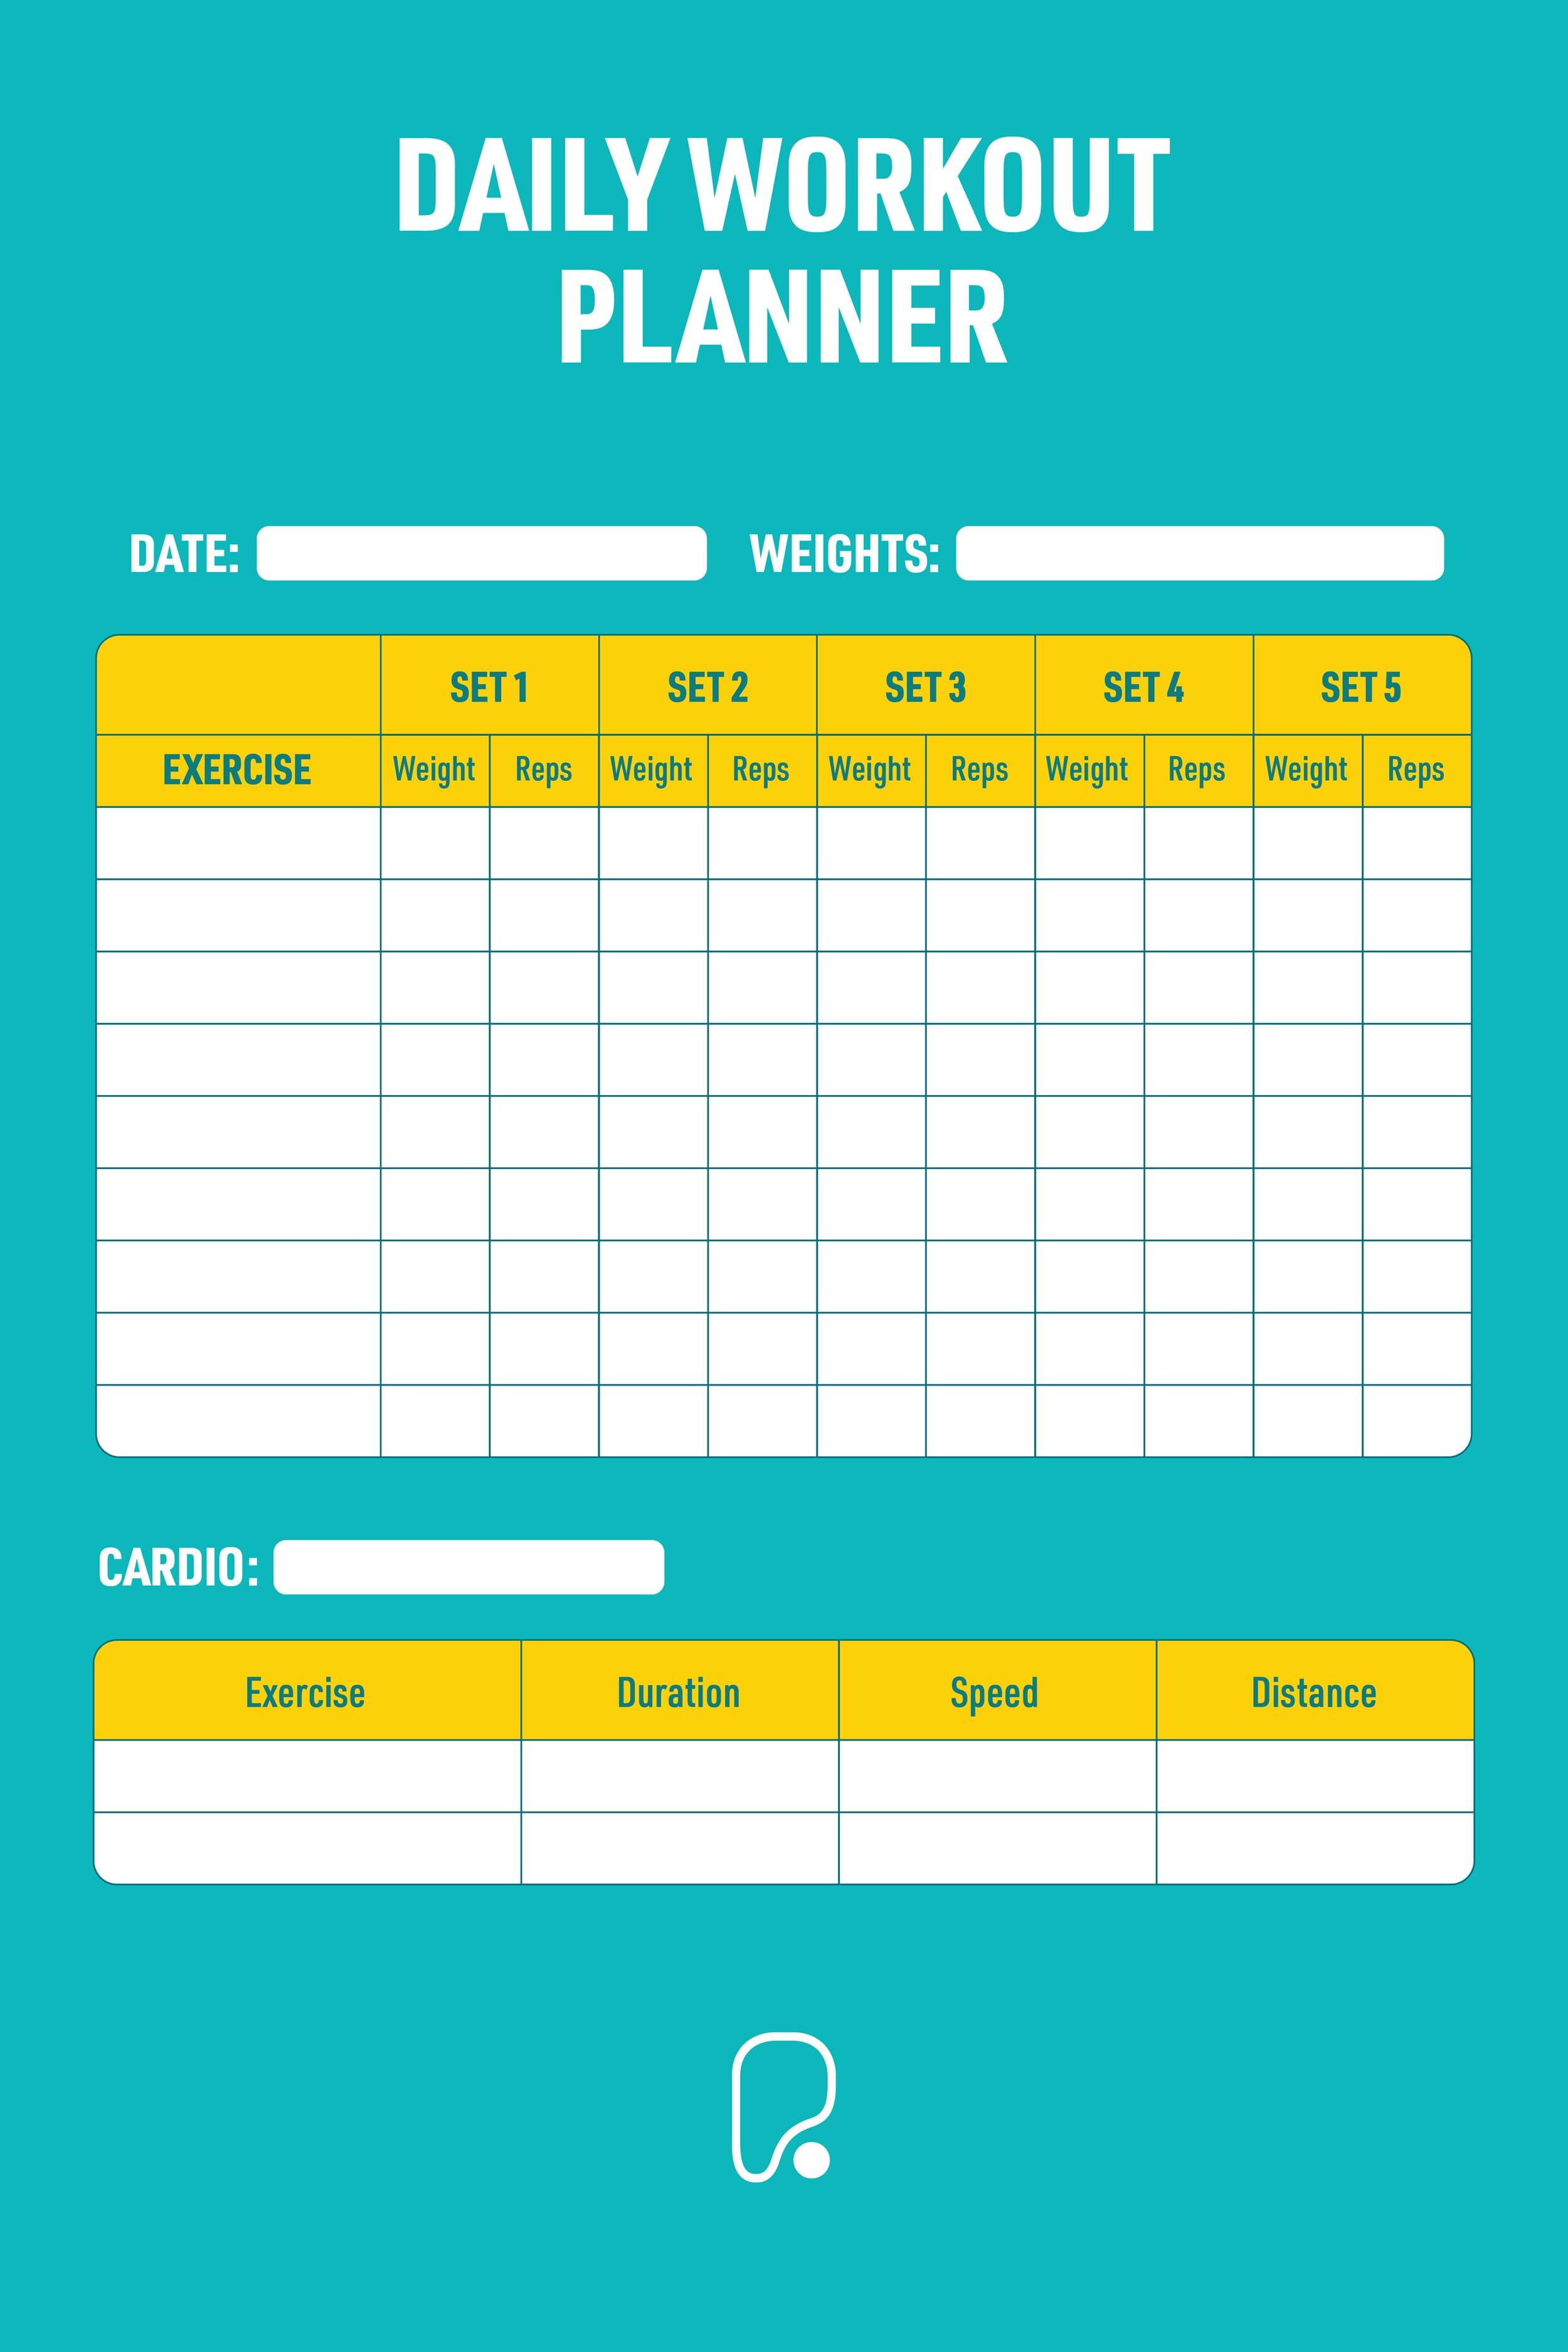 workout-plan-templates-download-or-make-yourself-puregym-workout